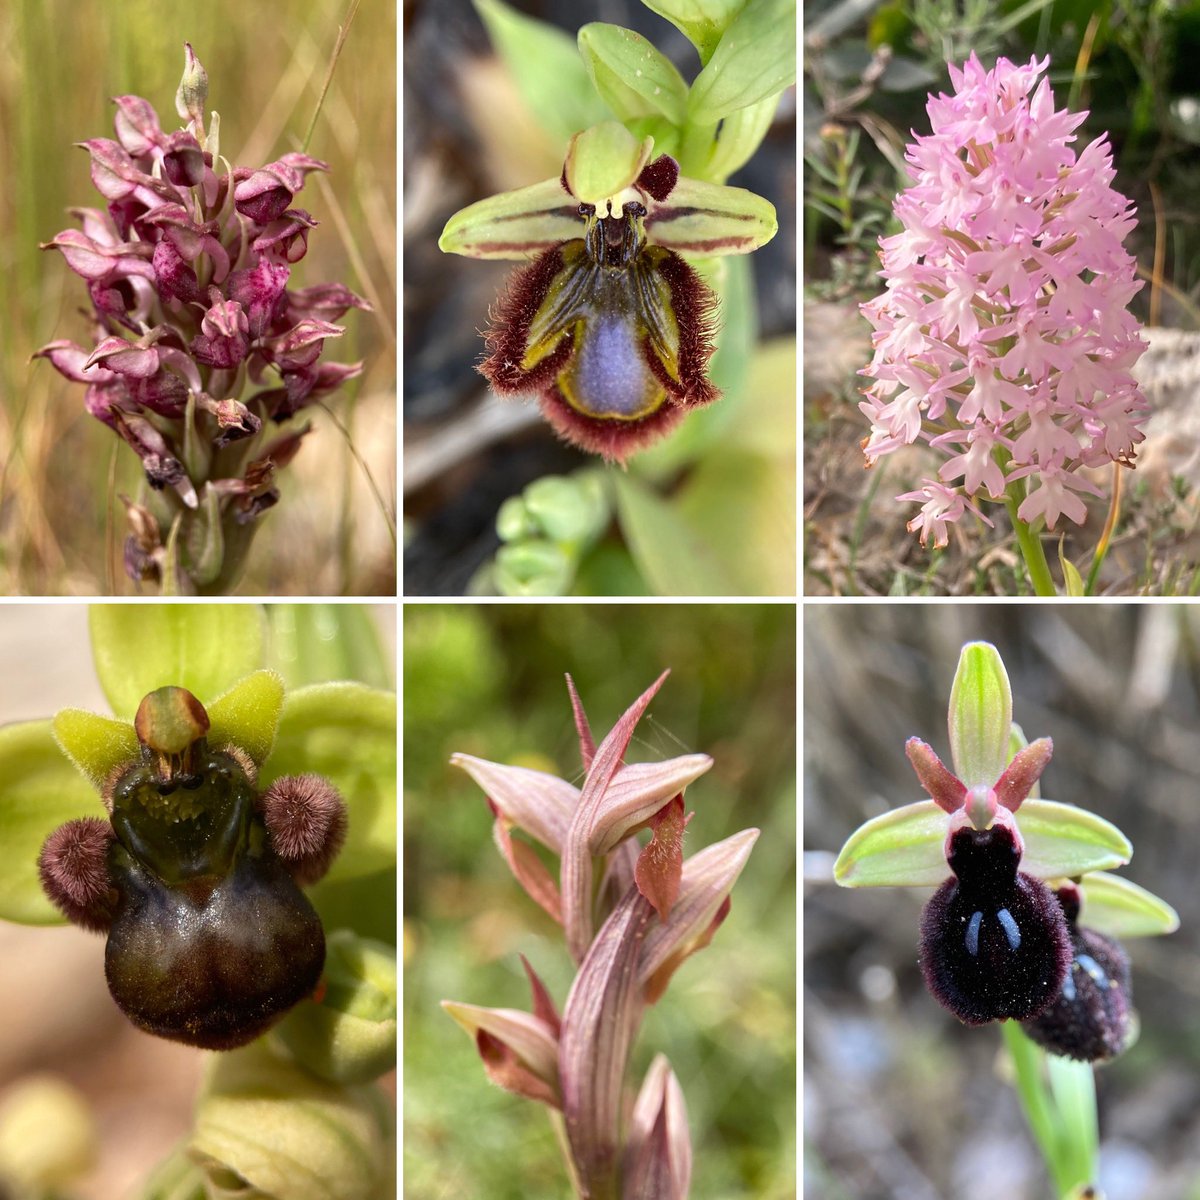 The six beautiful orchids that have kept me company in Malta for the last few days: Scented Bug, Mirror, Maltese Pyramidal, Bumblebee, Small-flowered Tongue and Maltese Spider 😍😍 #orchid #orchid #beautiful